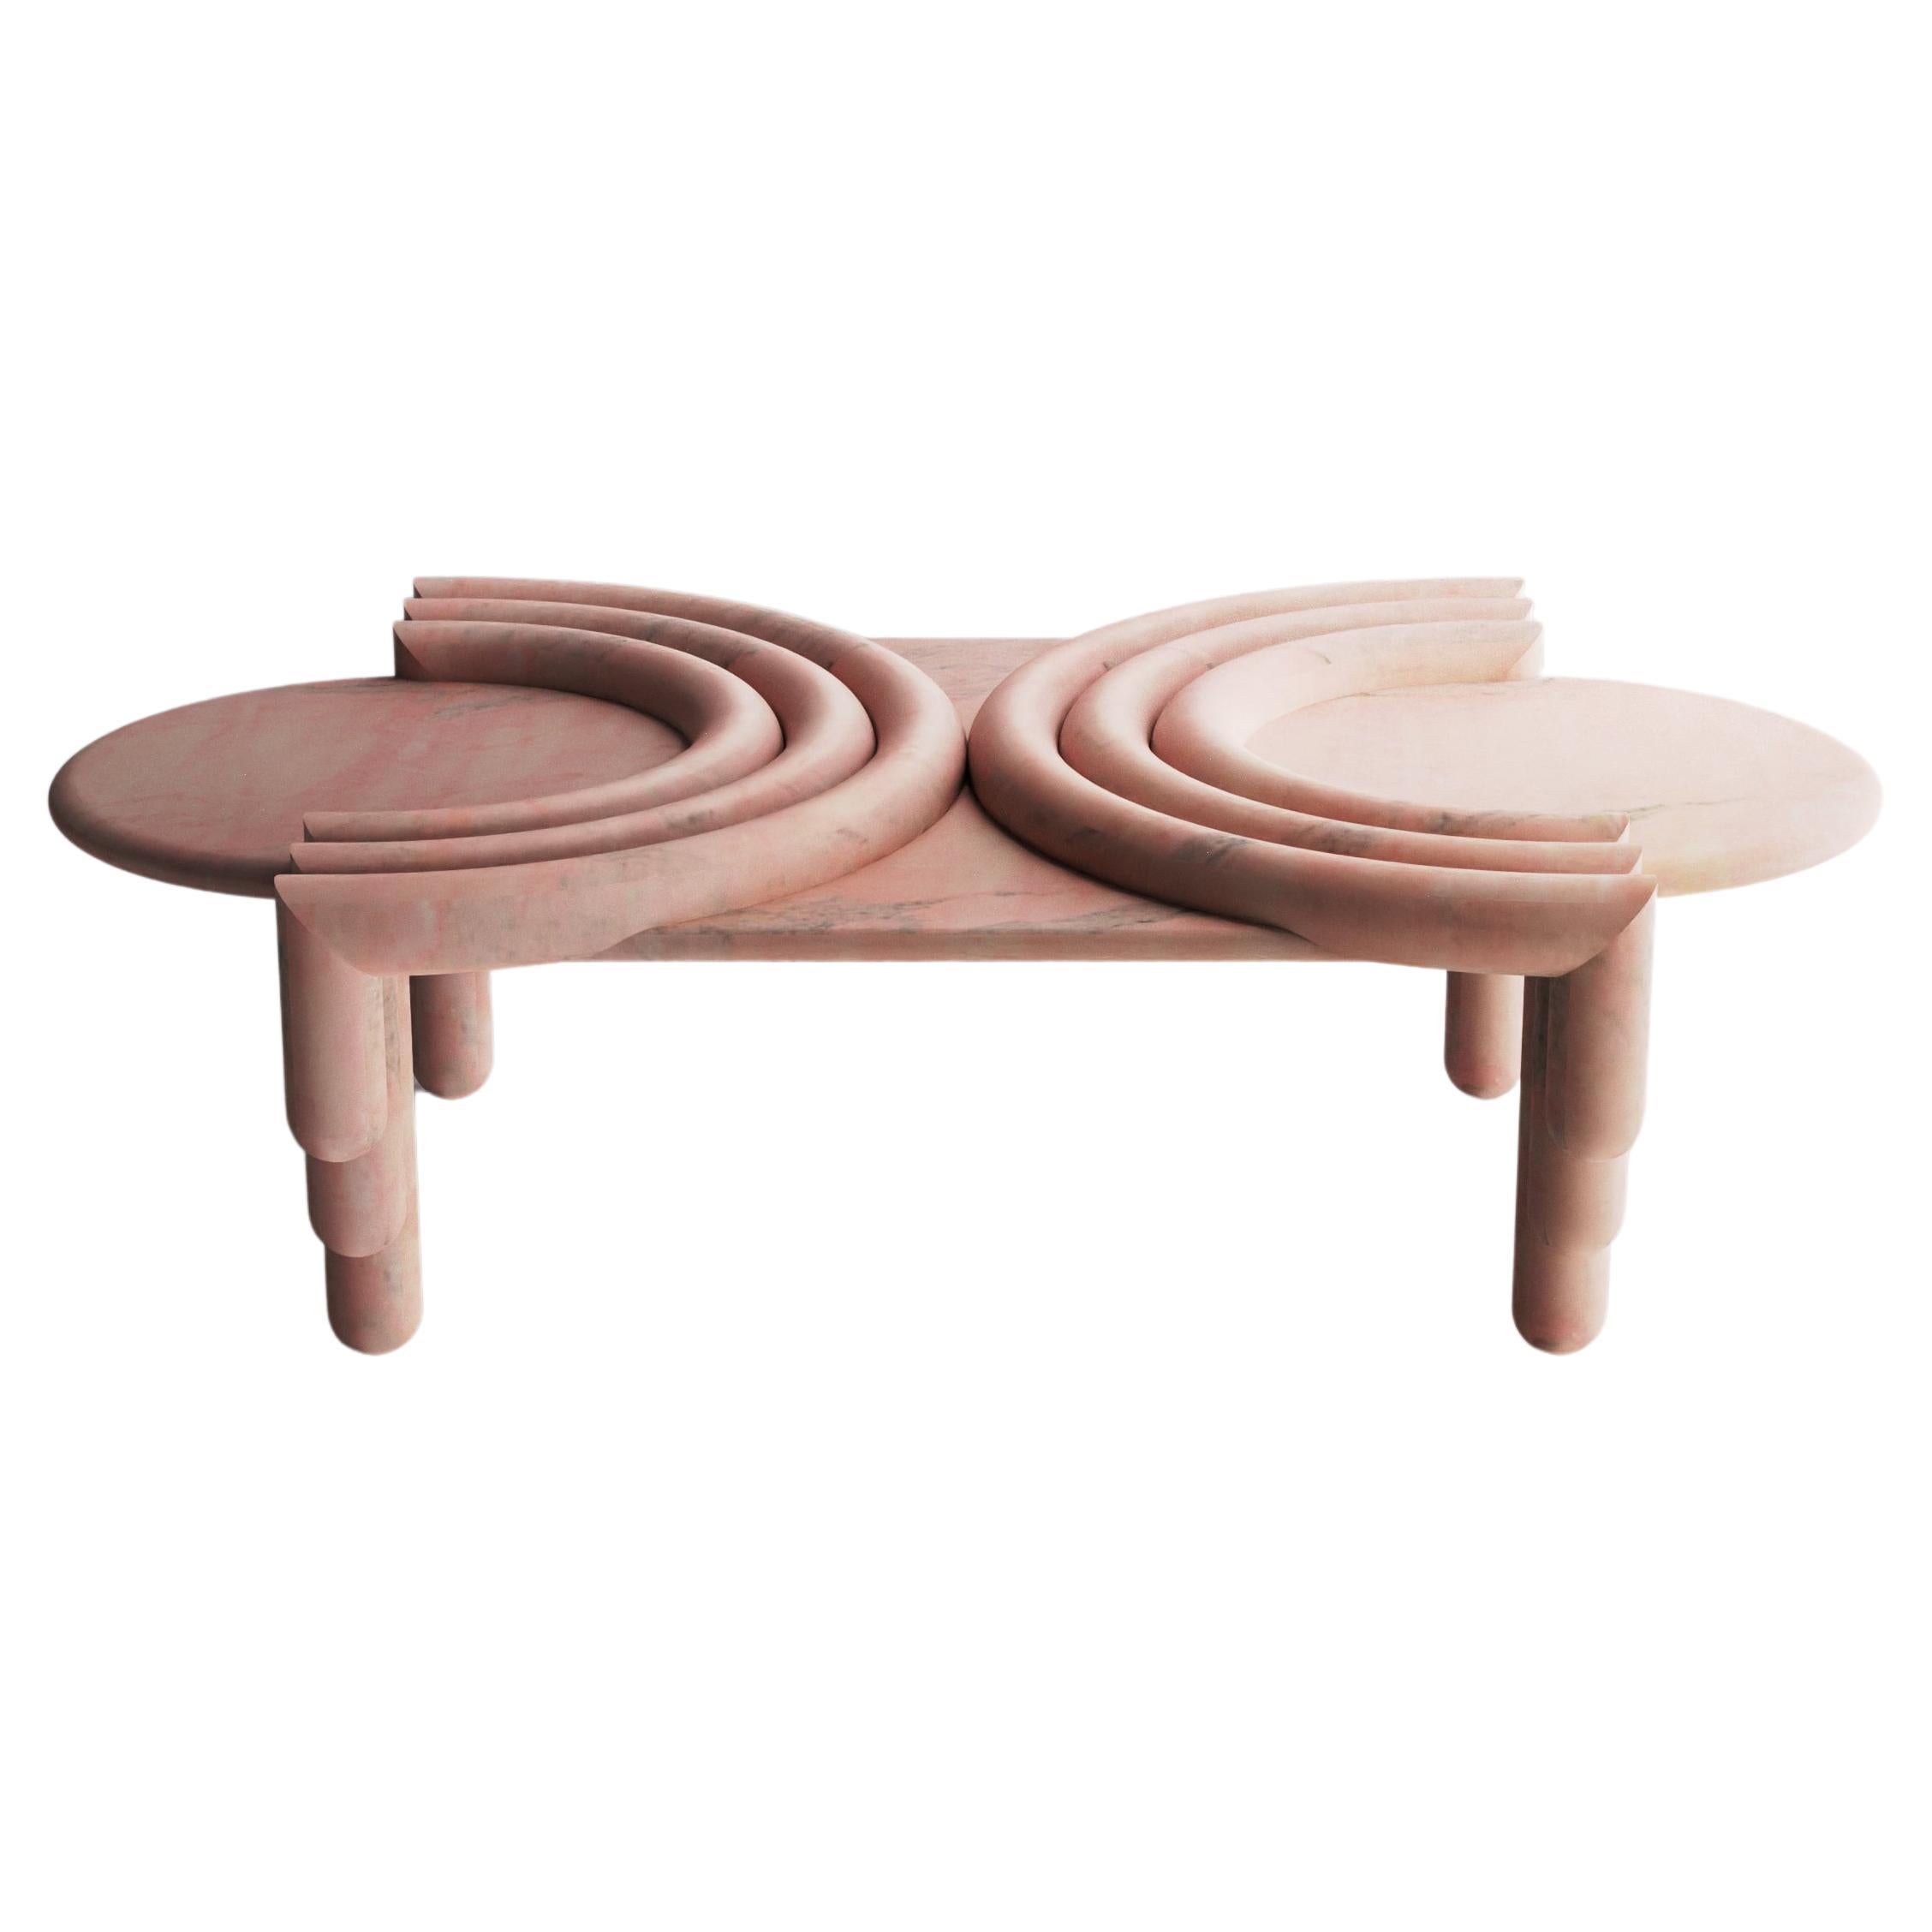 Sculptural Kipferl Coffee Table by Lara Bohinc in Rosa Portugalo Marble For Sale